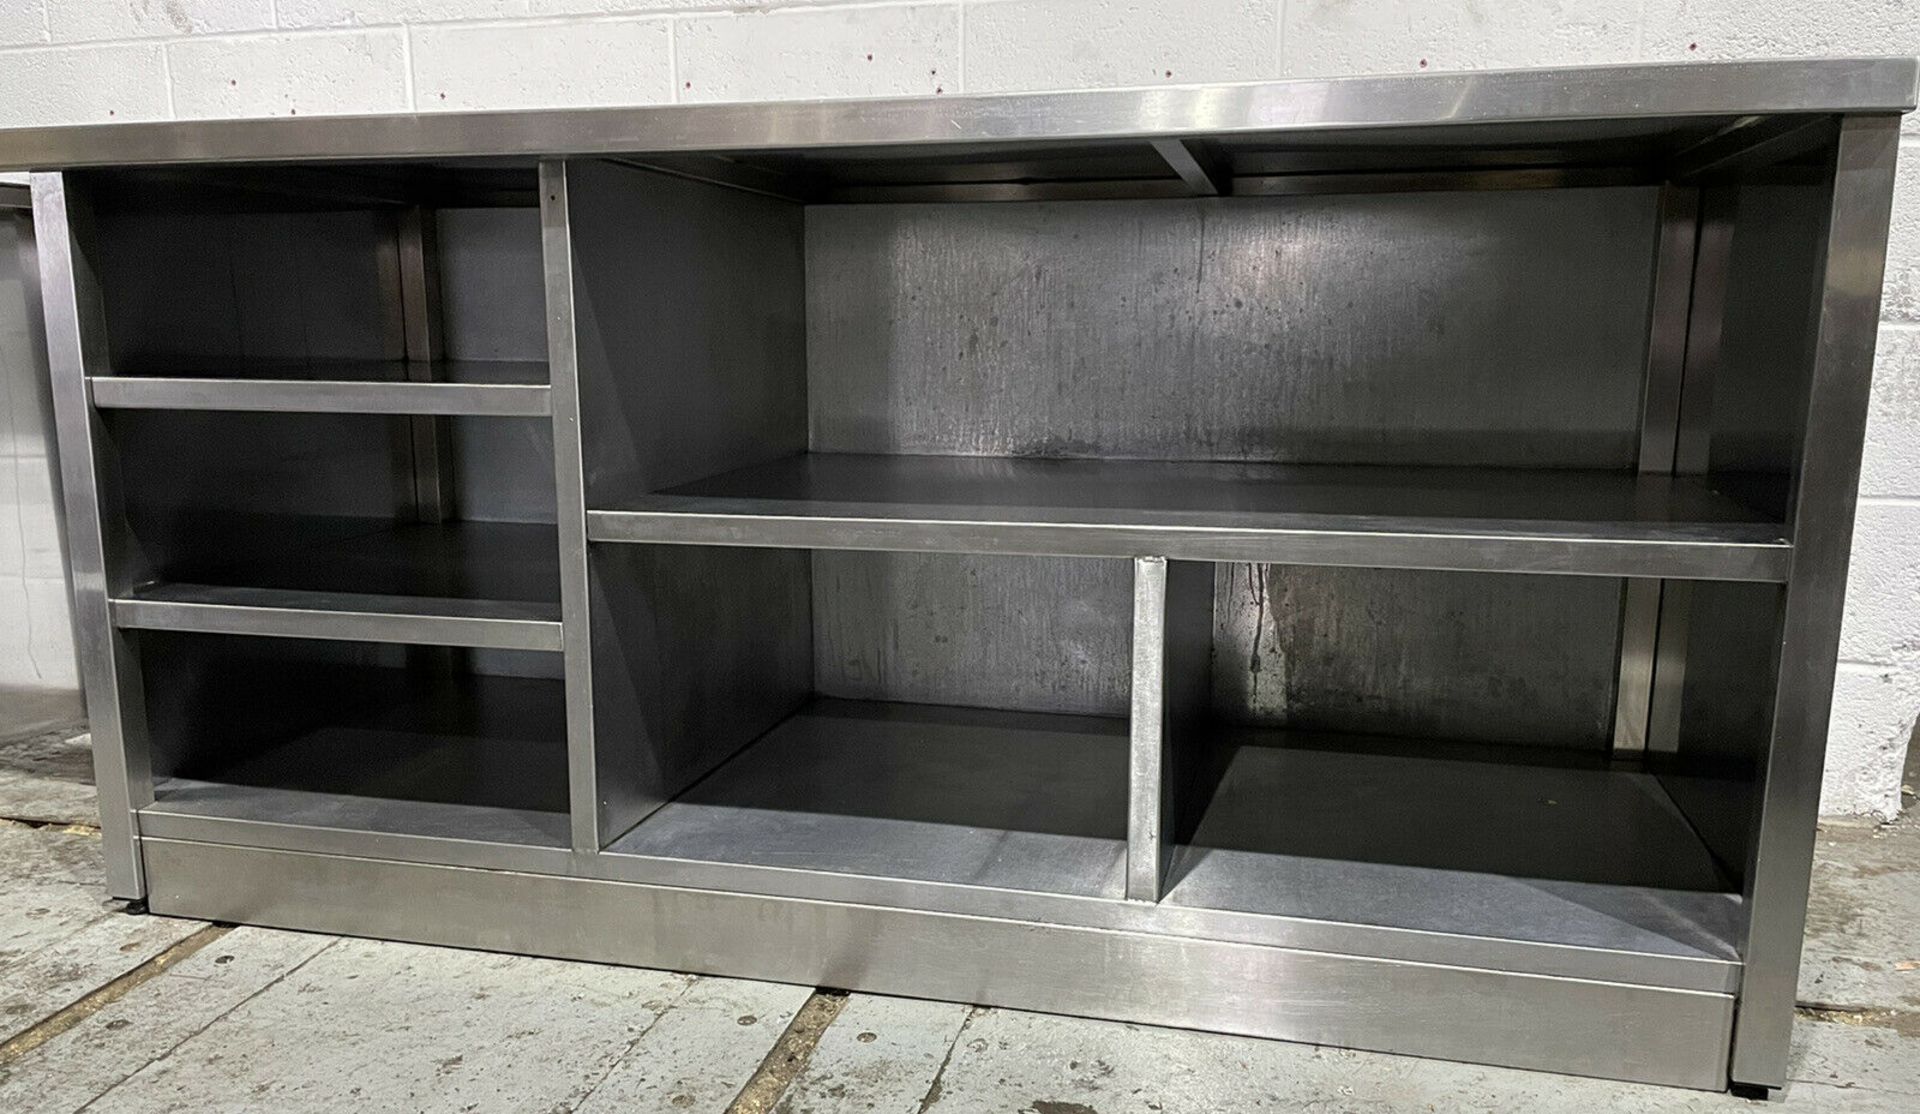 Stainless Steel Preperation Unit with Shelves - Image 3 of 6